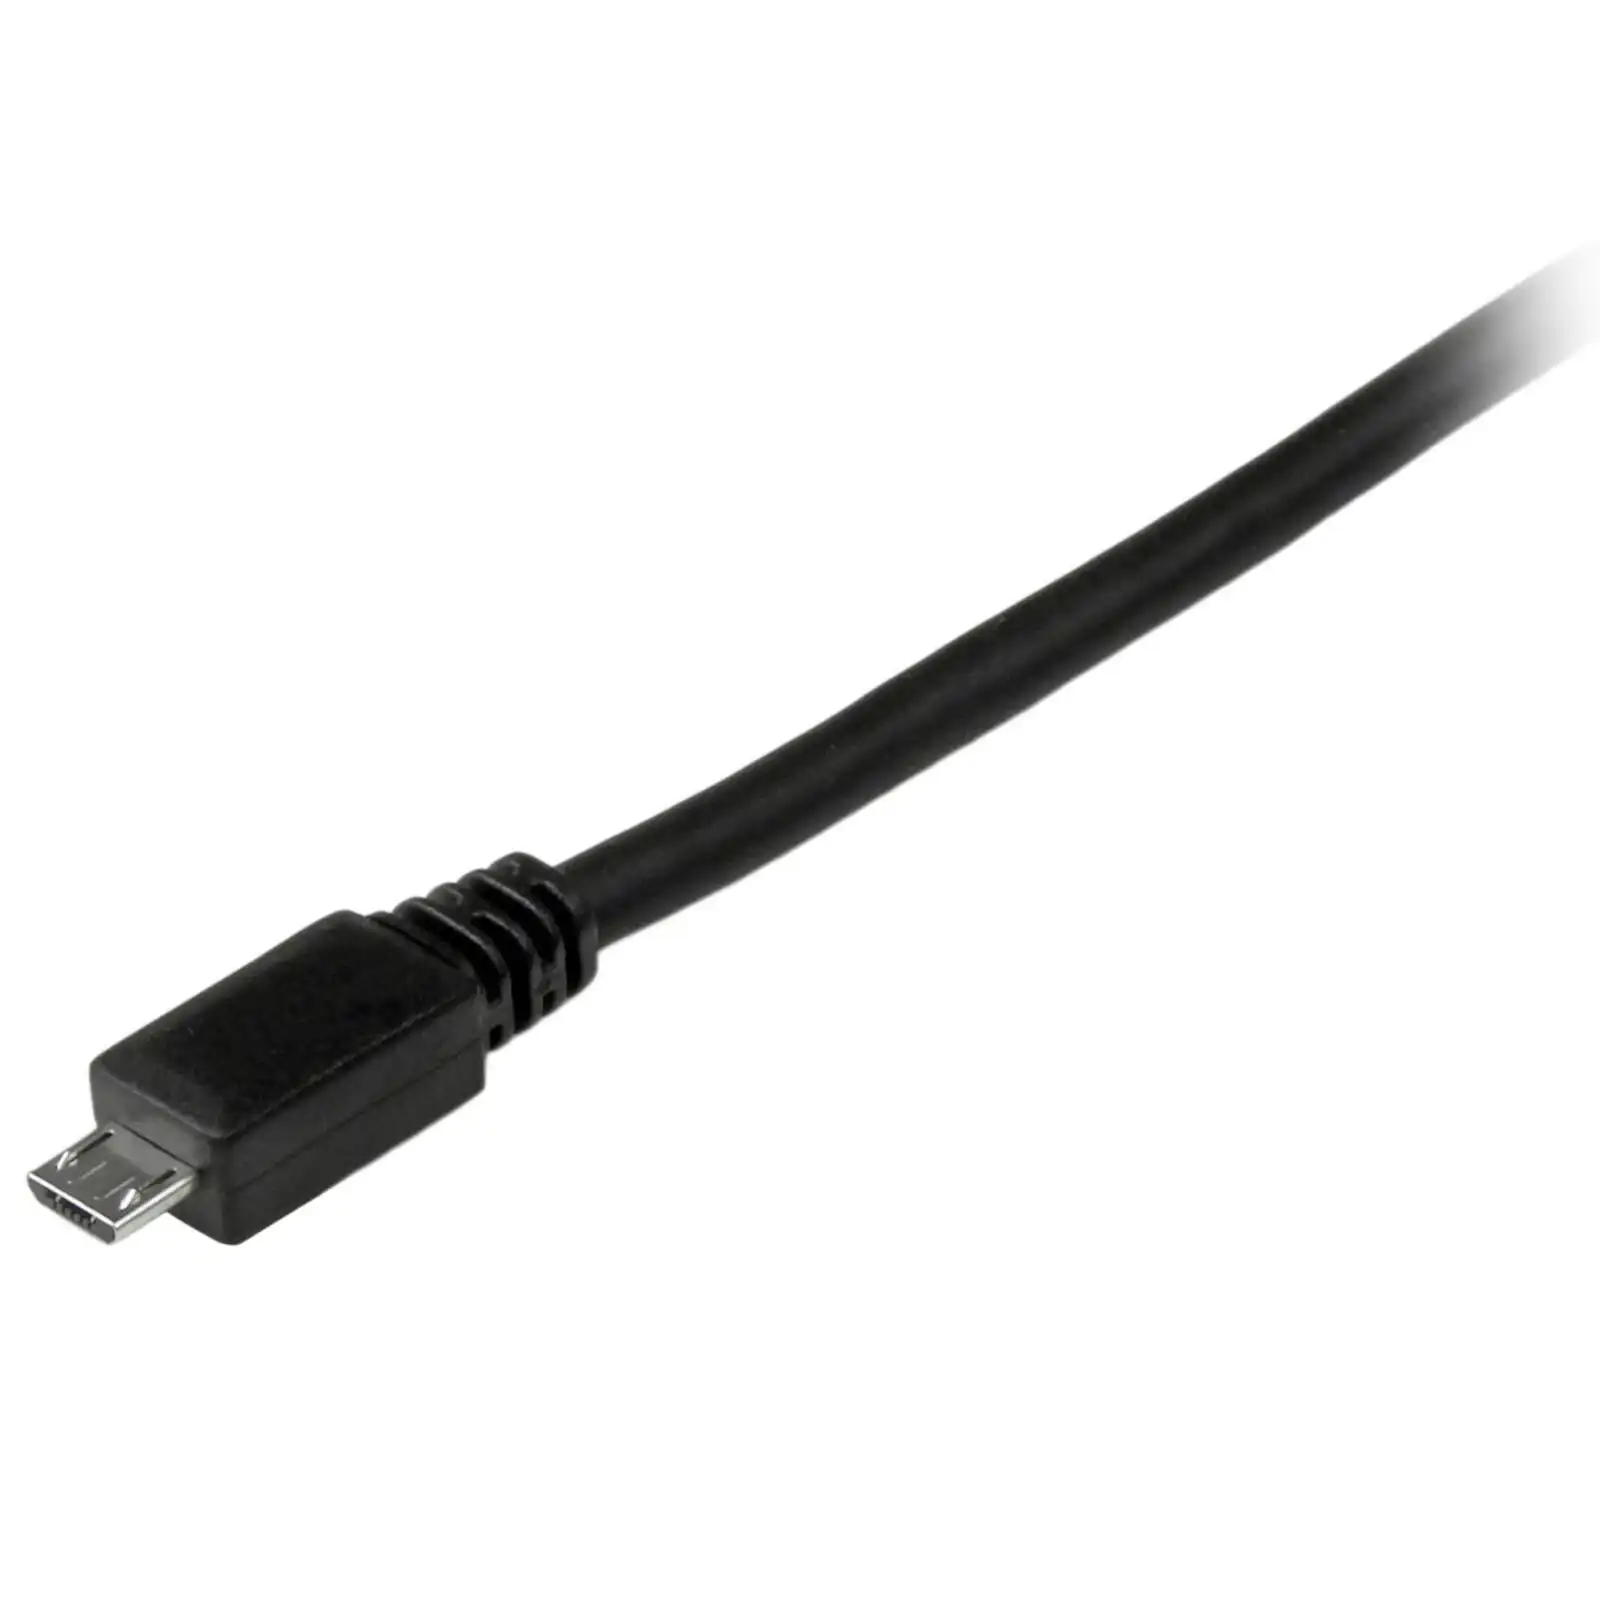 Star Tech 3M 1080p Passive Male/Male Micro USB to HDMI MHL Cable for TV/Monitor